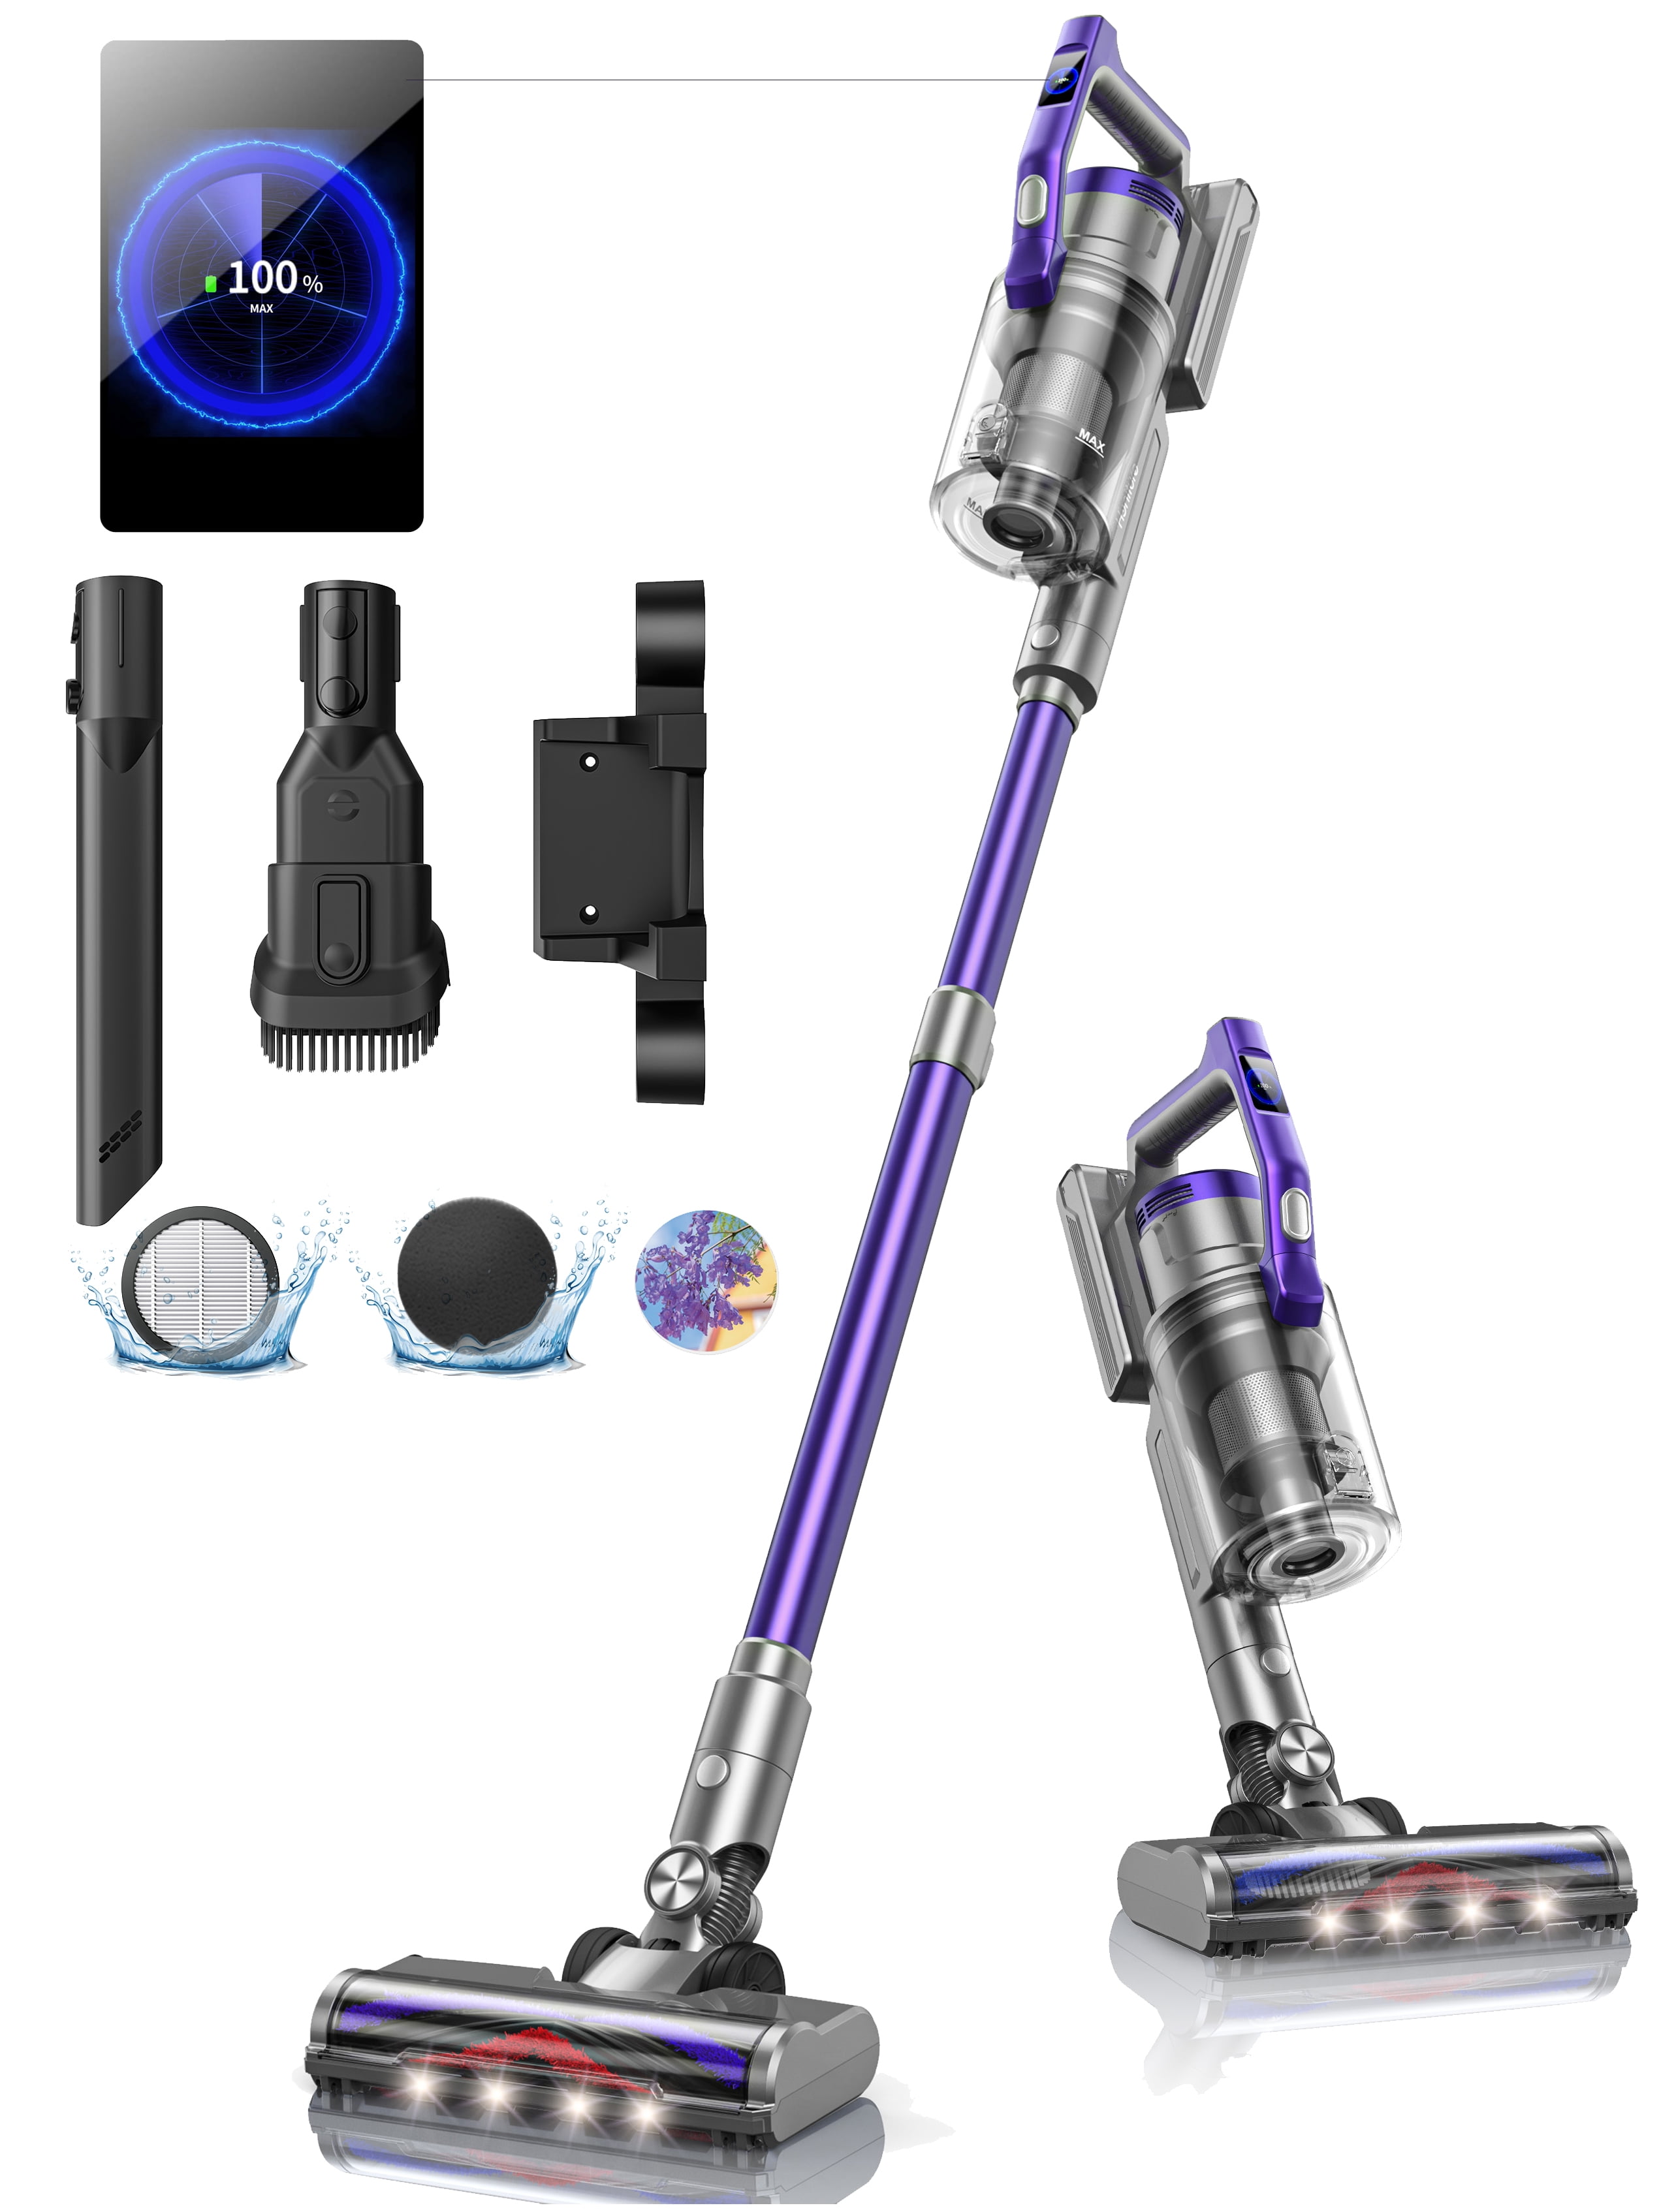 HONITURE Cordless Vacuum Cleaner 450W/38KPa Powerful Stick Vacuum Cleaner  with LCD Touch Screen, 55Min Runtime Battery, 6 in 1 Lightweight Handheld